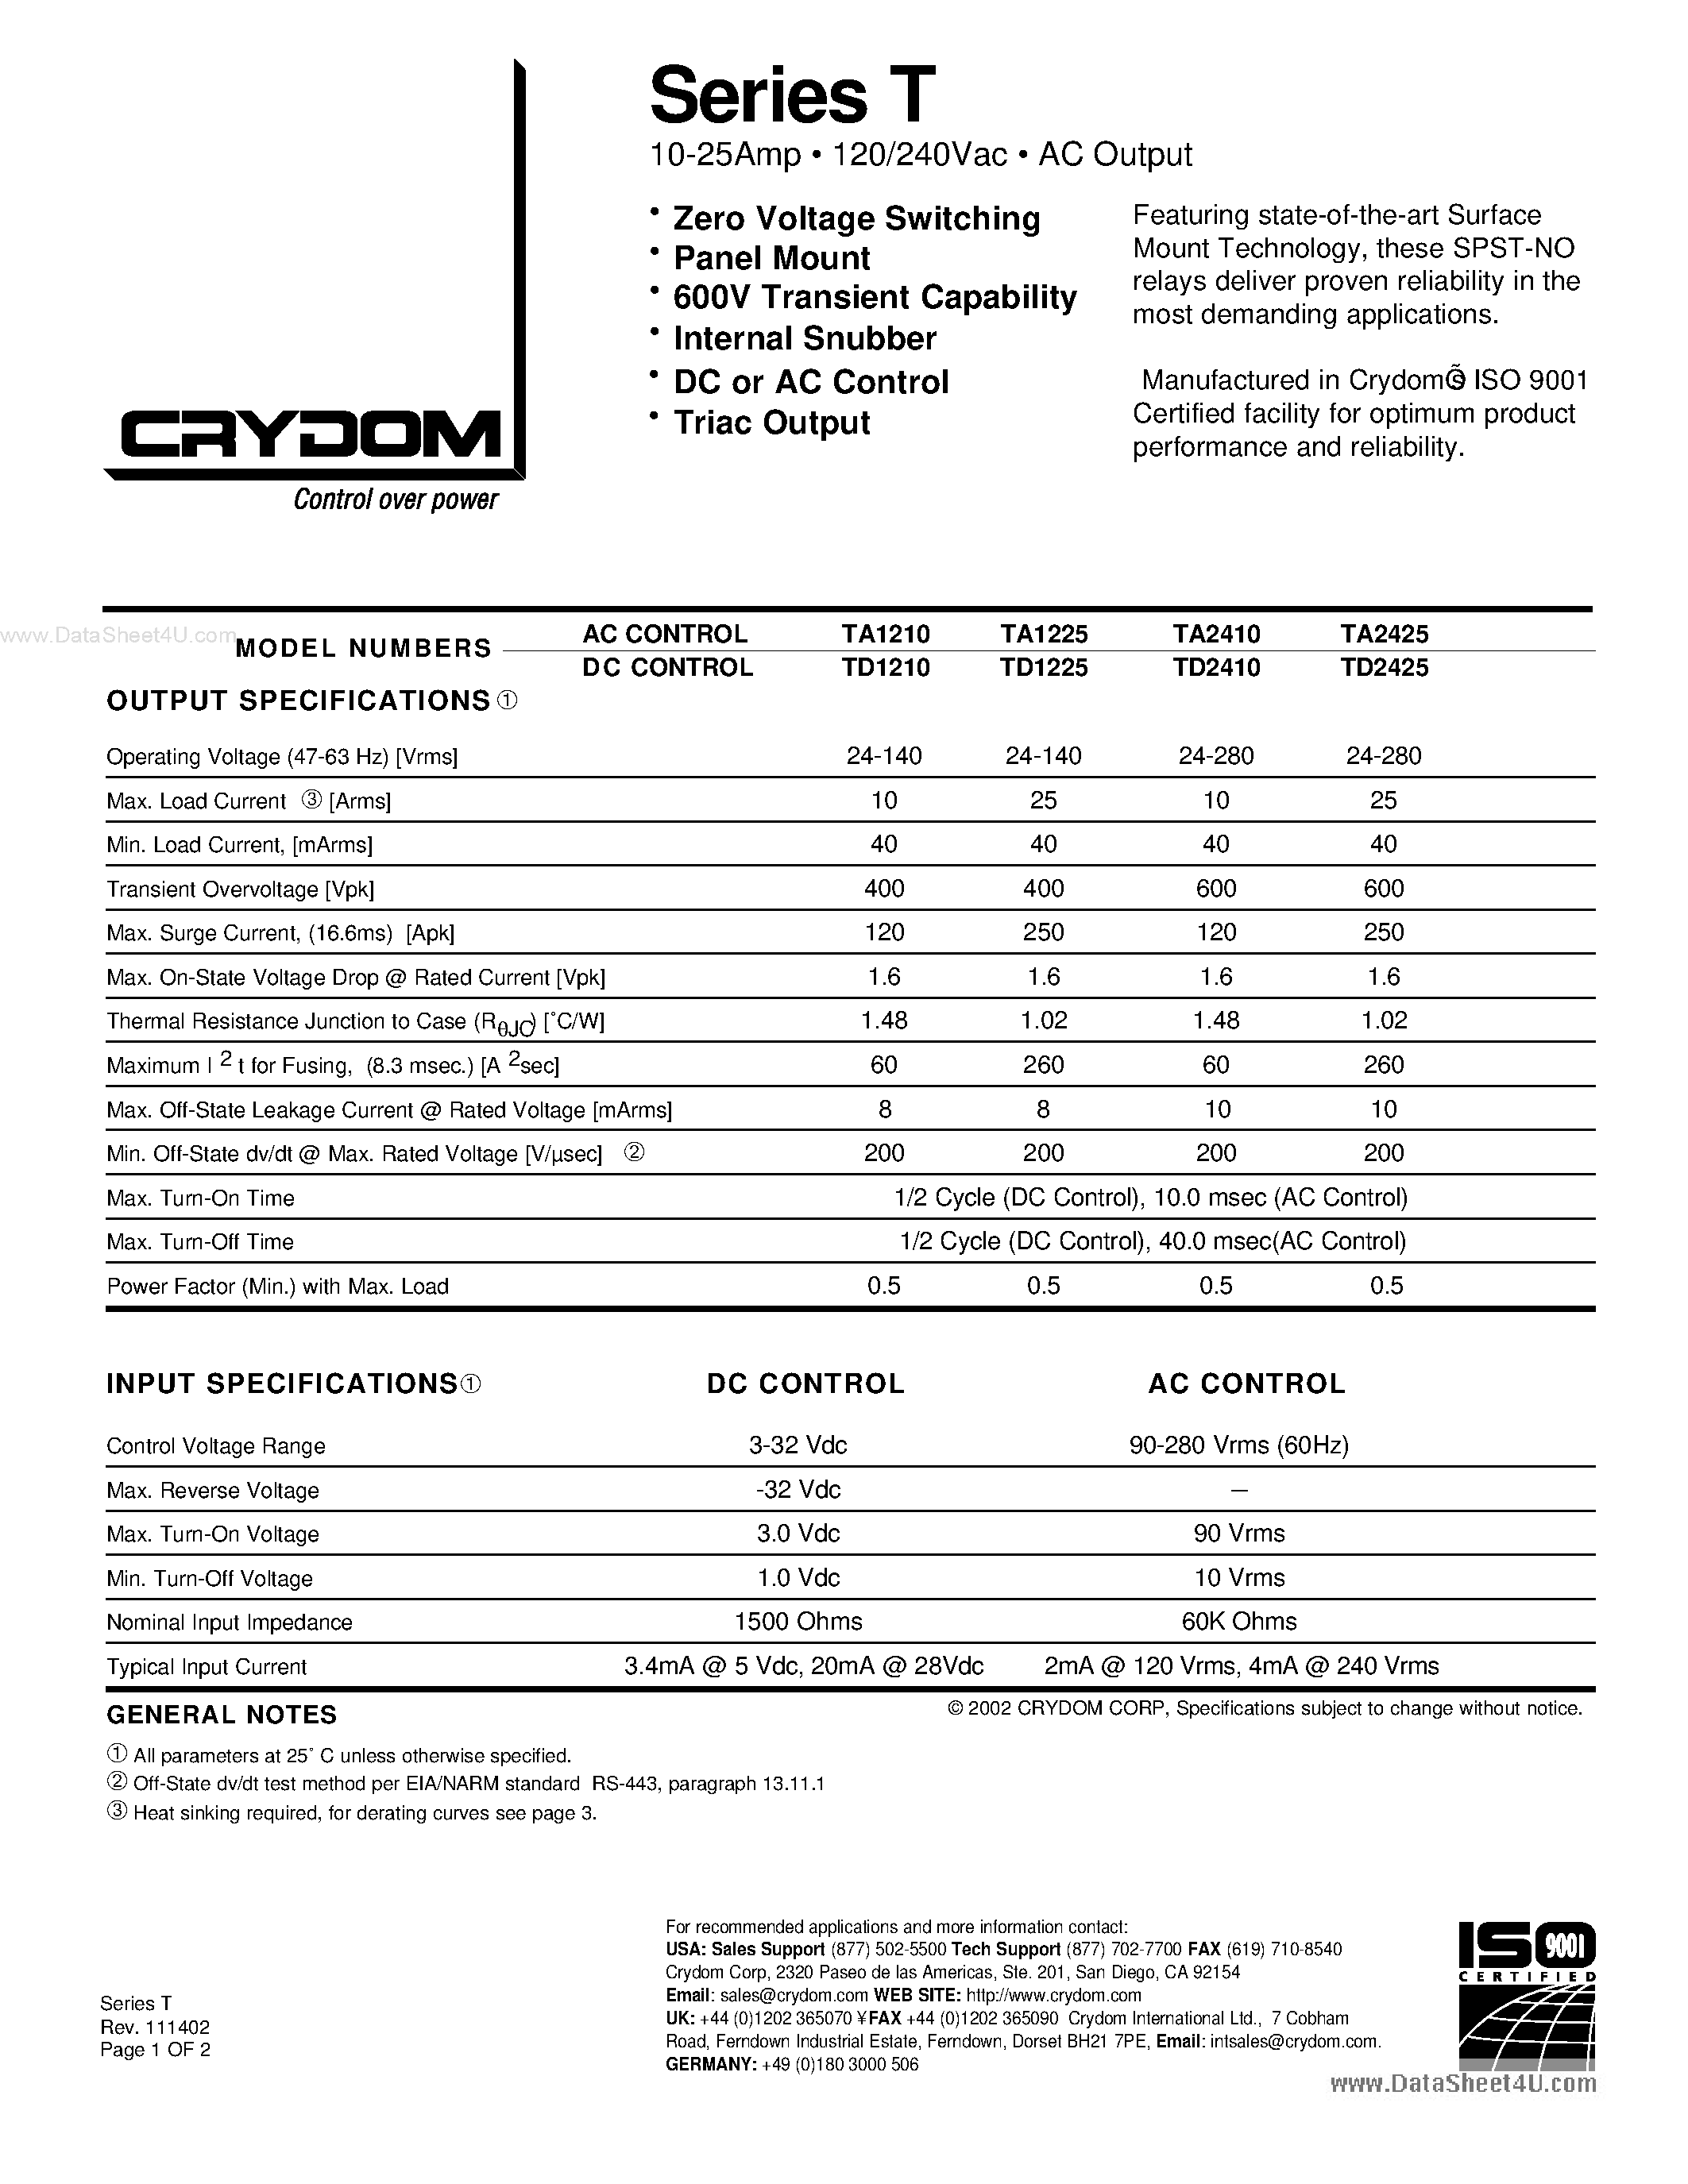 Datasheet TD2410 - (TD2410 / TD2425) Zero Cross0.04-25 Amps RMS24-280 Volts RMS3-32 Control - Volts DC page 1